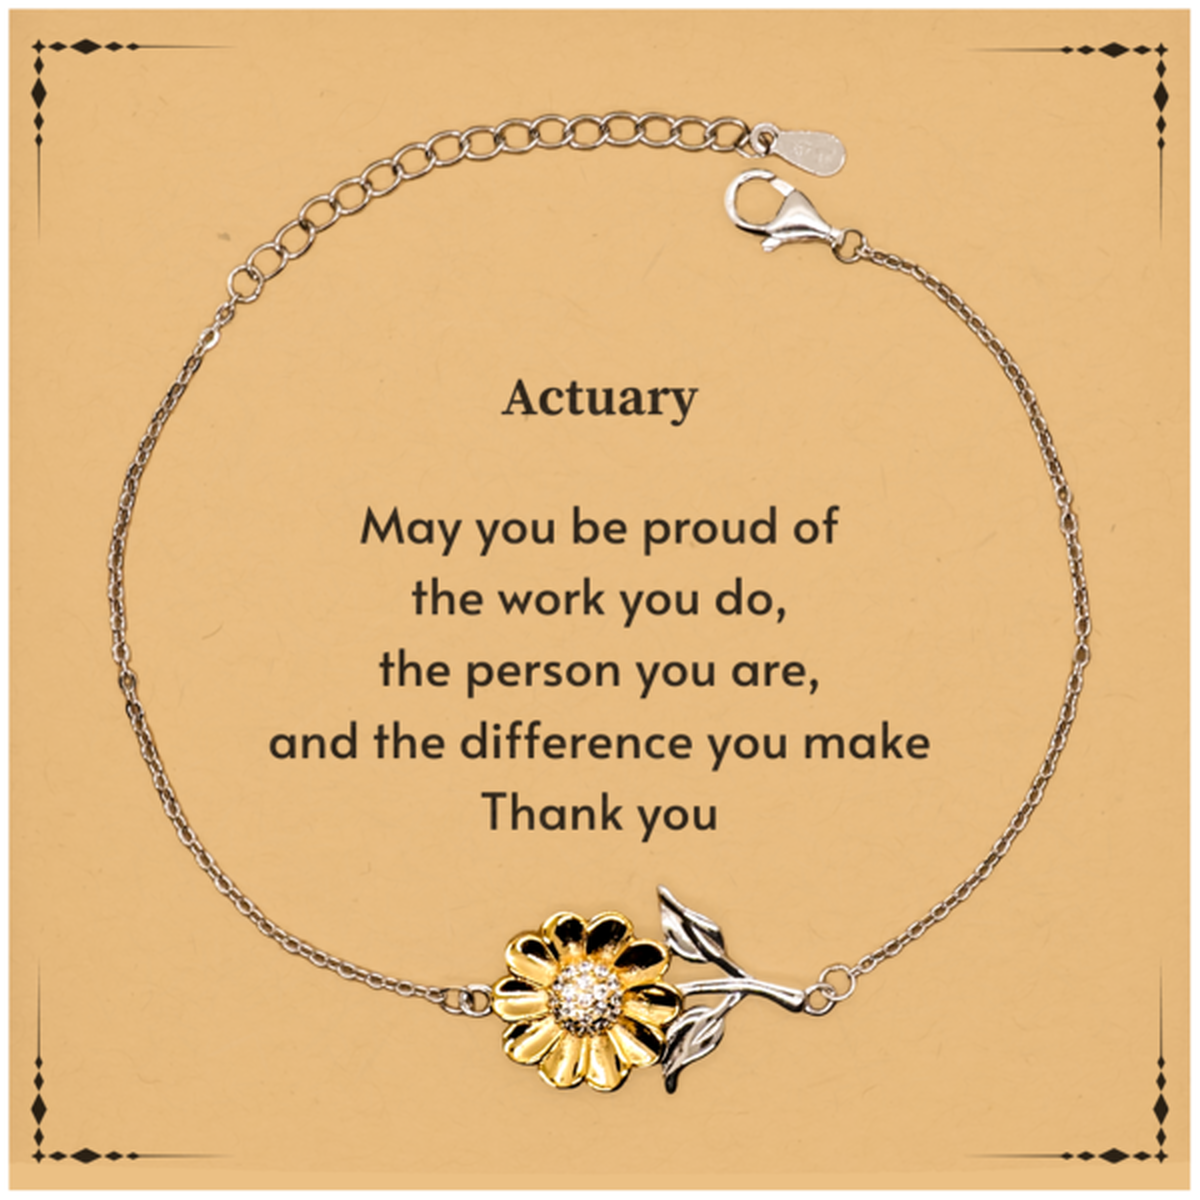 Heartwarming Sunflower Bracelet Retirement Coworkers Gifts for Actuary, Actuary May You be proud of the work you do, the person you are Gifts for Boss Men Women Friends